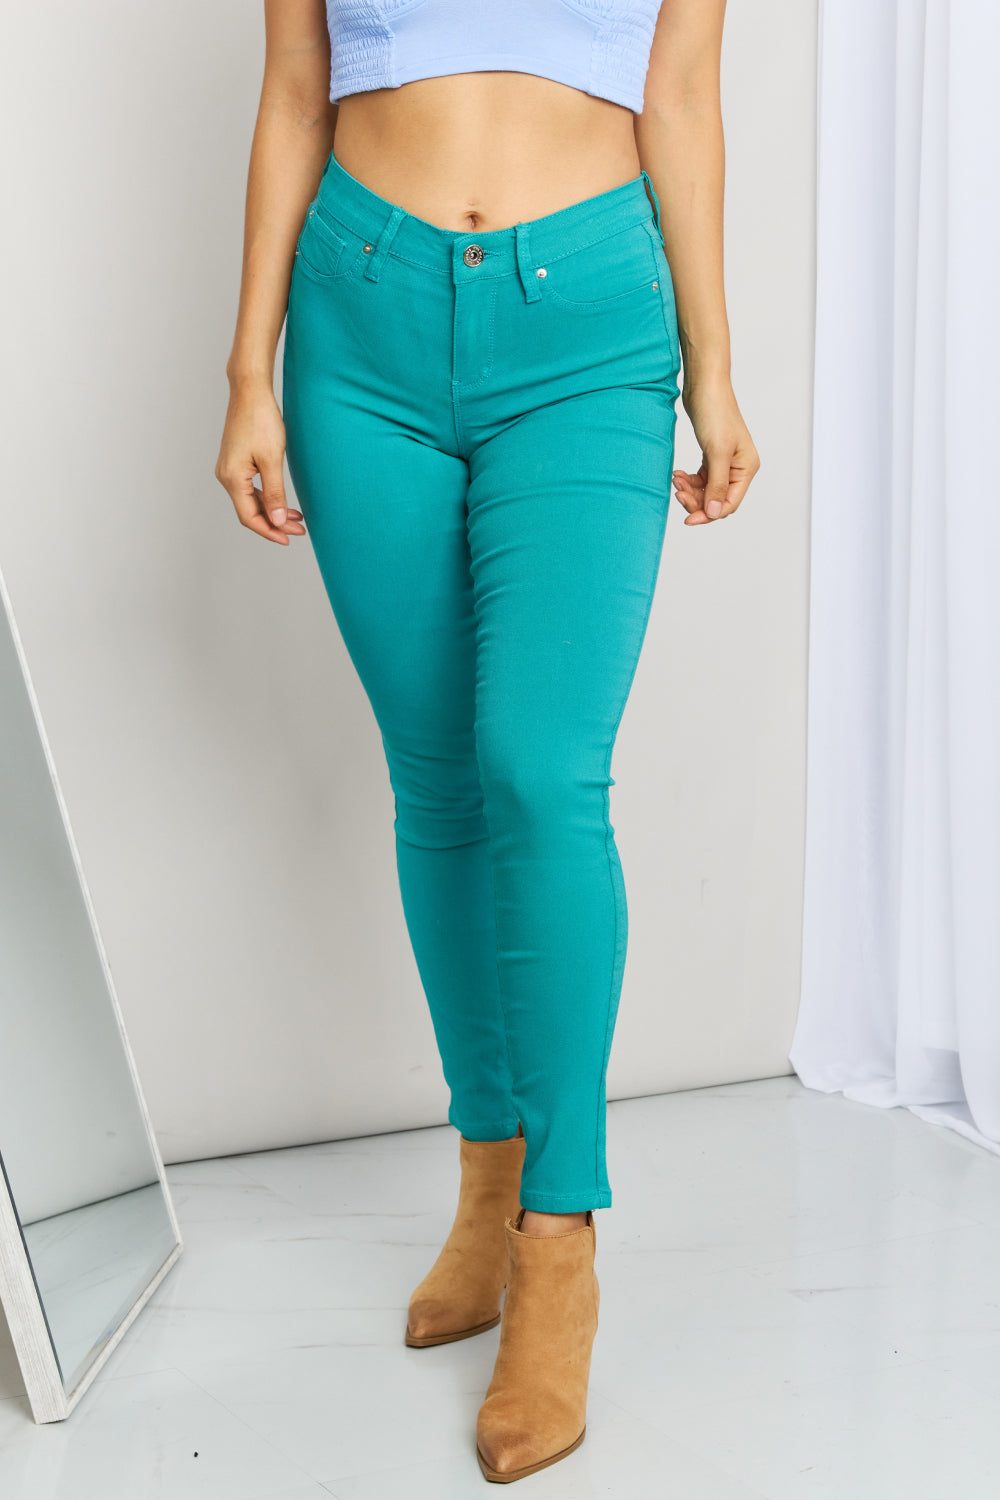 - YMI Jeanswear Kate Hyper-Stretch Full Size Mid-Rise Skinny Jeans in Sea Green - Ships from The US - womens jeans at TFC&H Co.